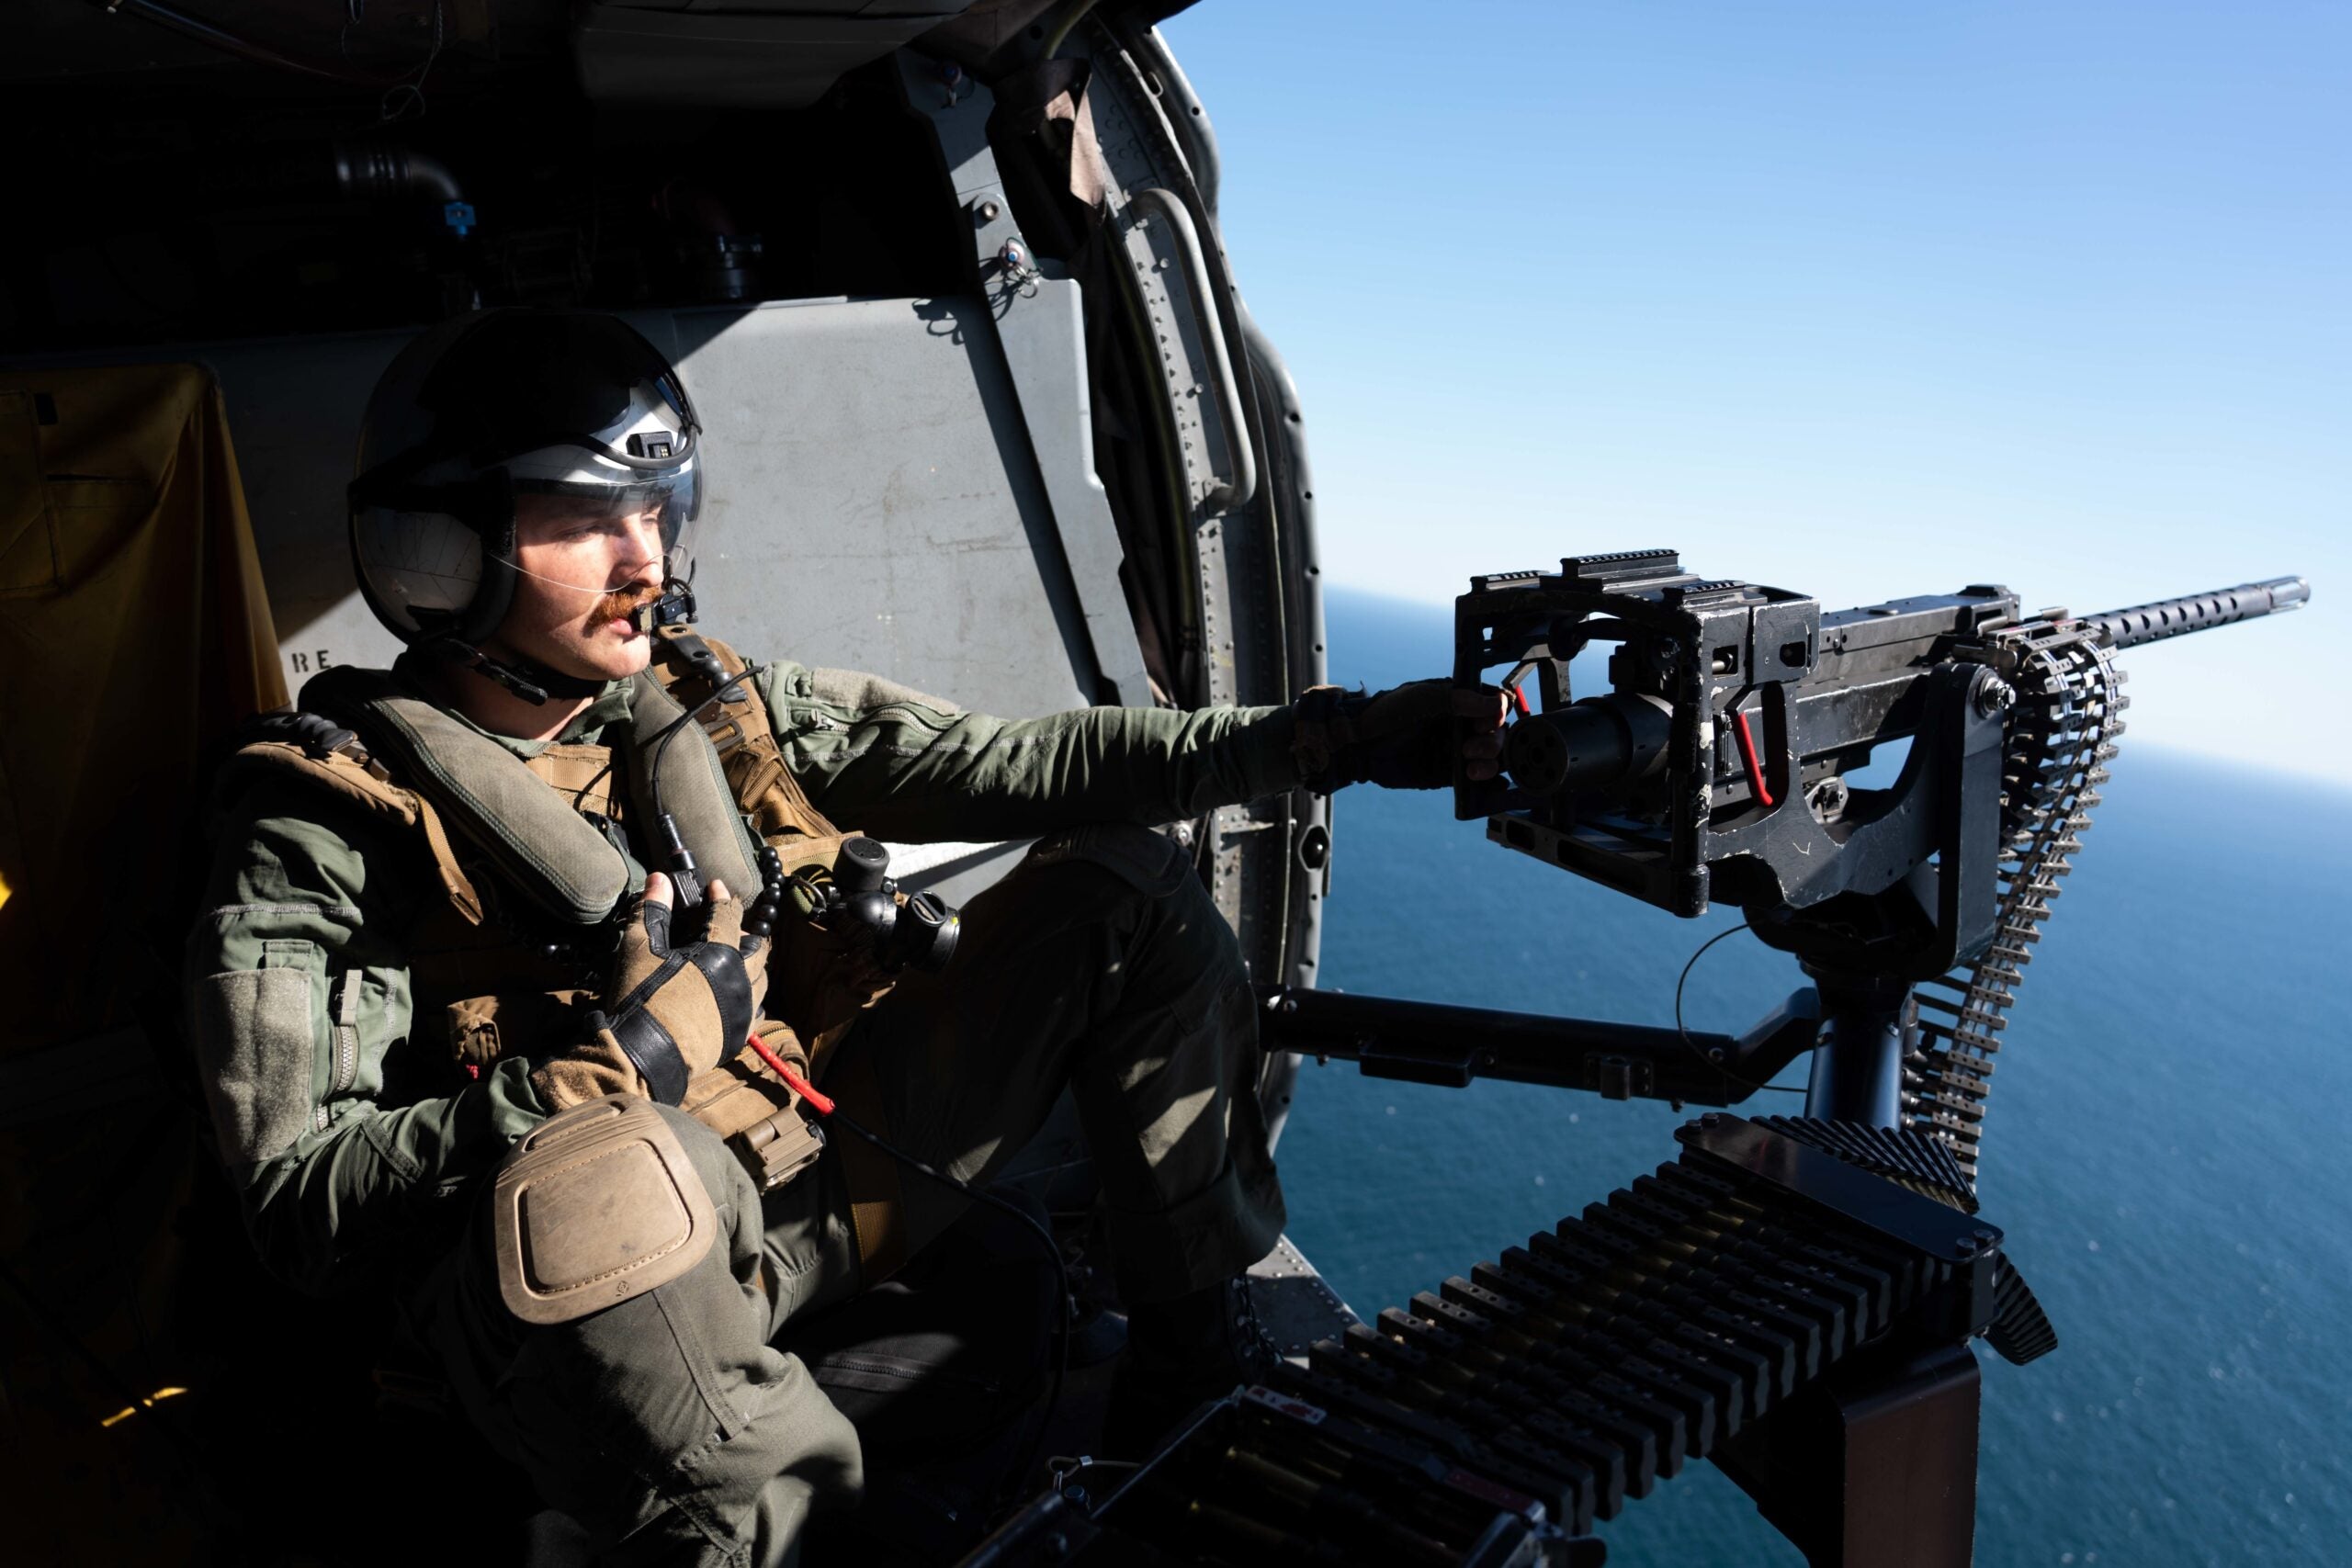 PACIFIC OCEAN (April 18, 2021) Naval Aircrewman (Helicopter) 2nd Class Daniel Ayres, from Fresno, Calif., assigned to Helicopter Sea Combat Squadron (HSC) 21, operates a GAU-21 .50-caliber machine gun in an MH-60S Sea Hawk during a live-fire exercise with the amphibious assault ship USS Essex (LHD 2). Essex is underway conducting routine operations in U.S. 3rd Fleet. (U.S. Navy photo by Mass Communication Specialist Seaman Sang Kim)